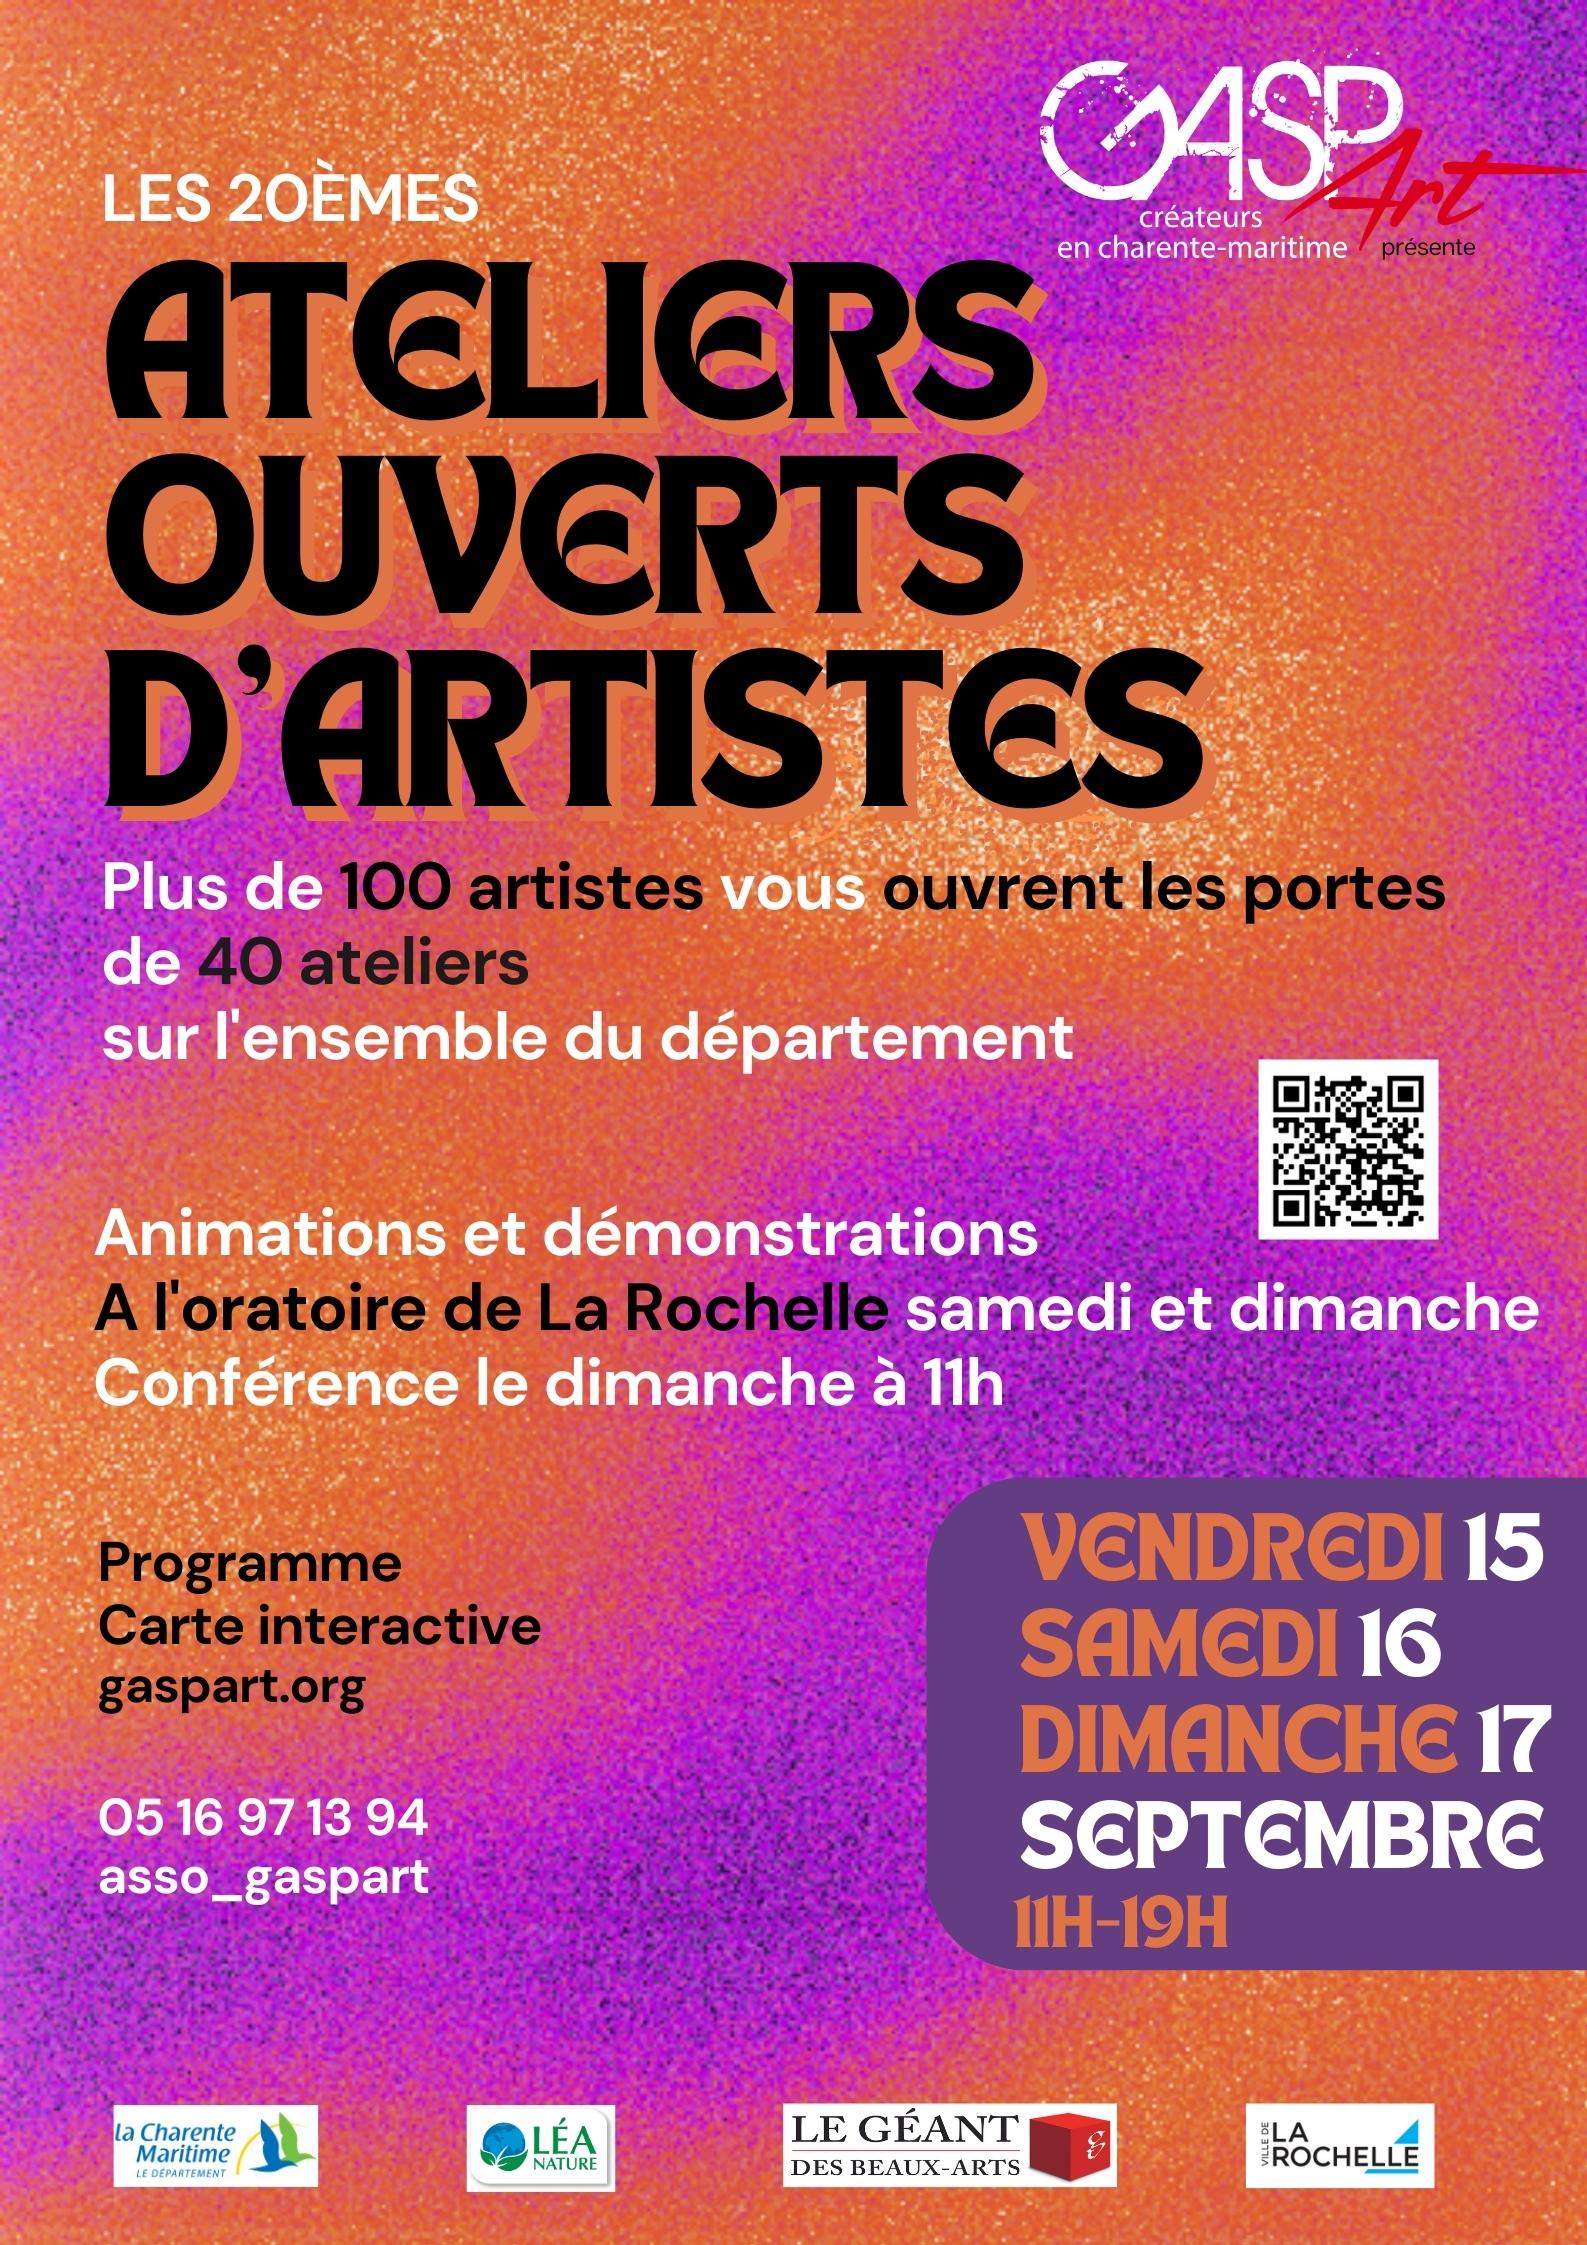 Ateliers ouverts artistes gaspart